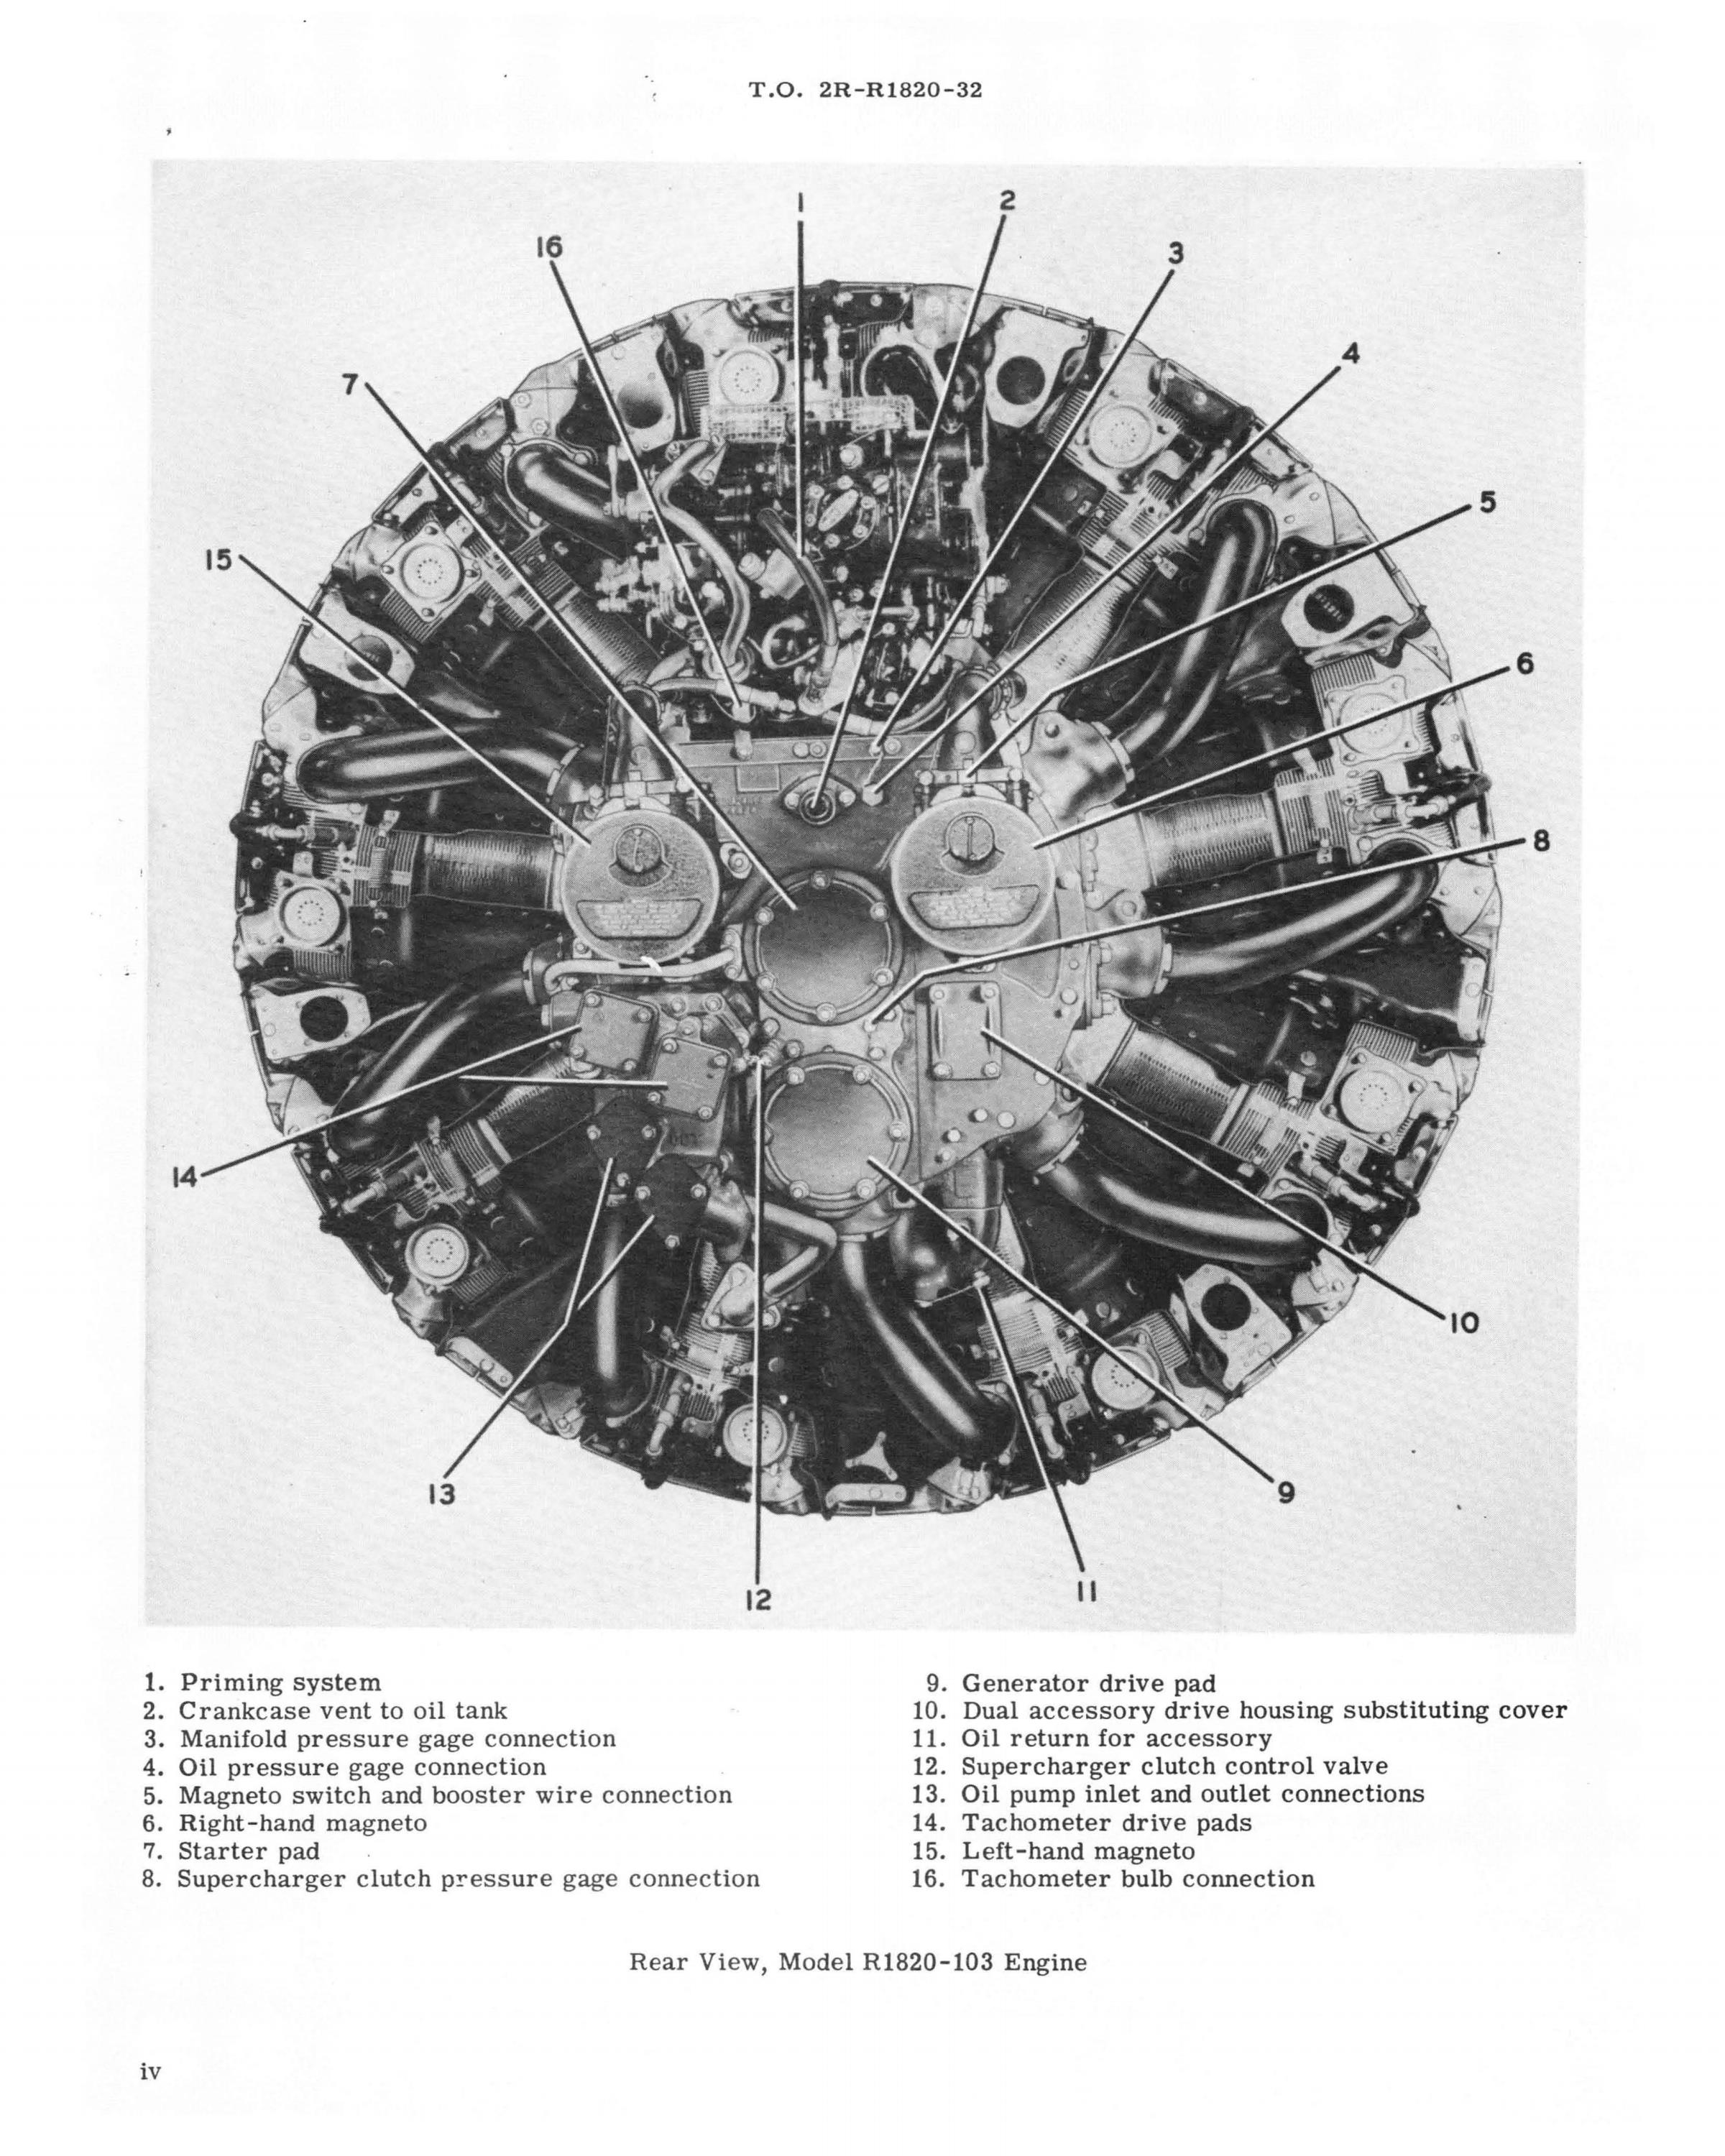 Sample page 6 from AirCorps Library document: Service Instructions for Model R-1820-103 Engine